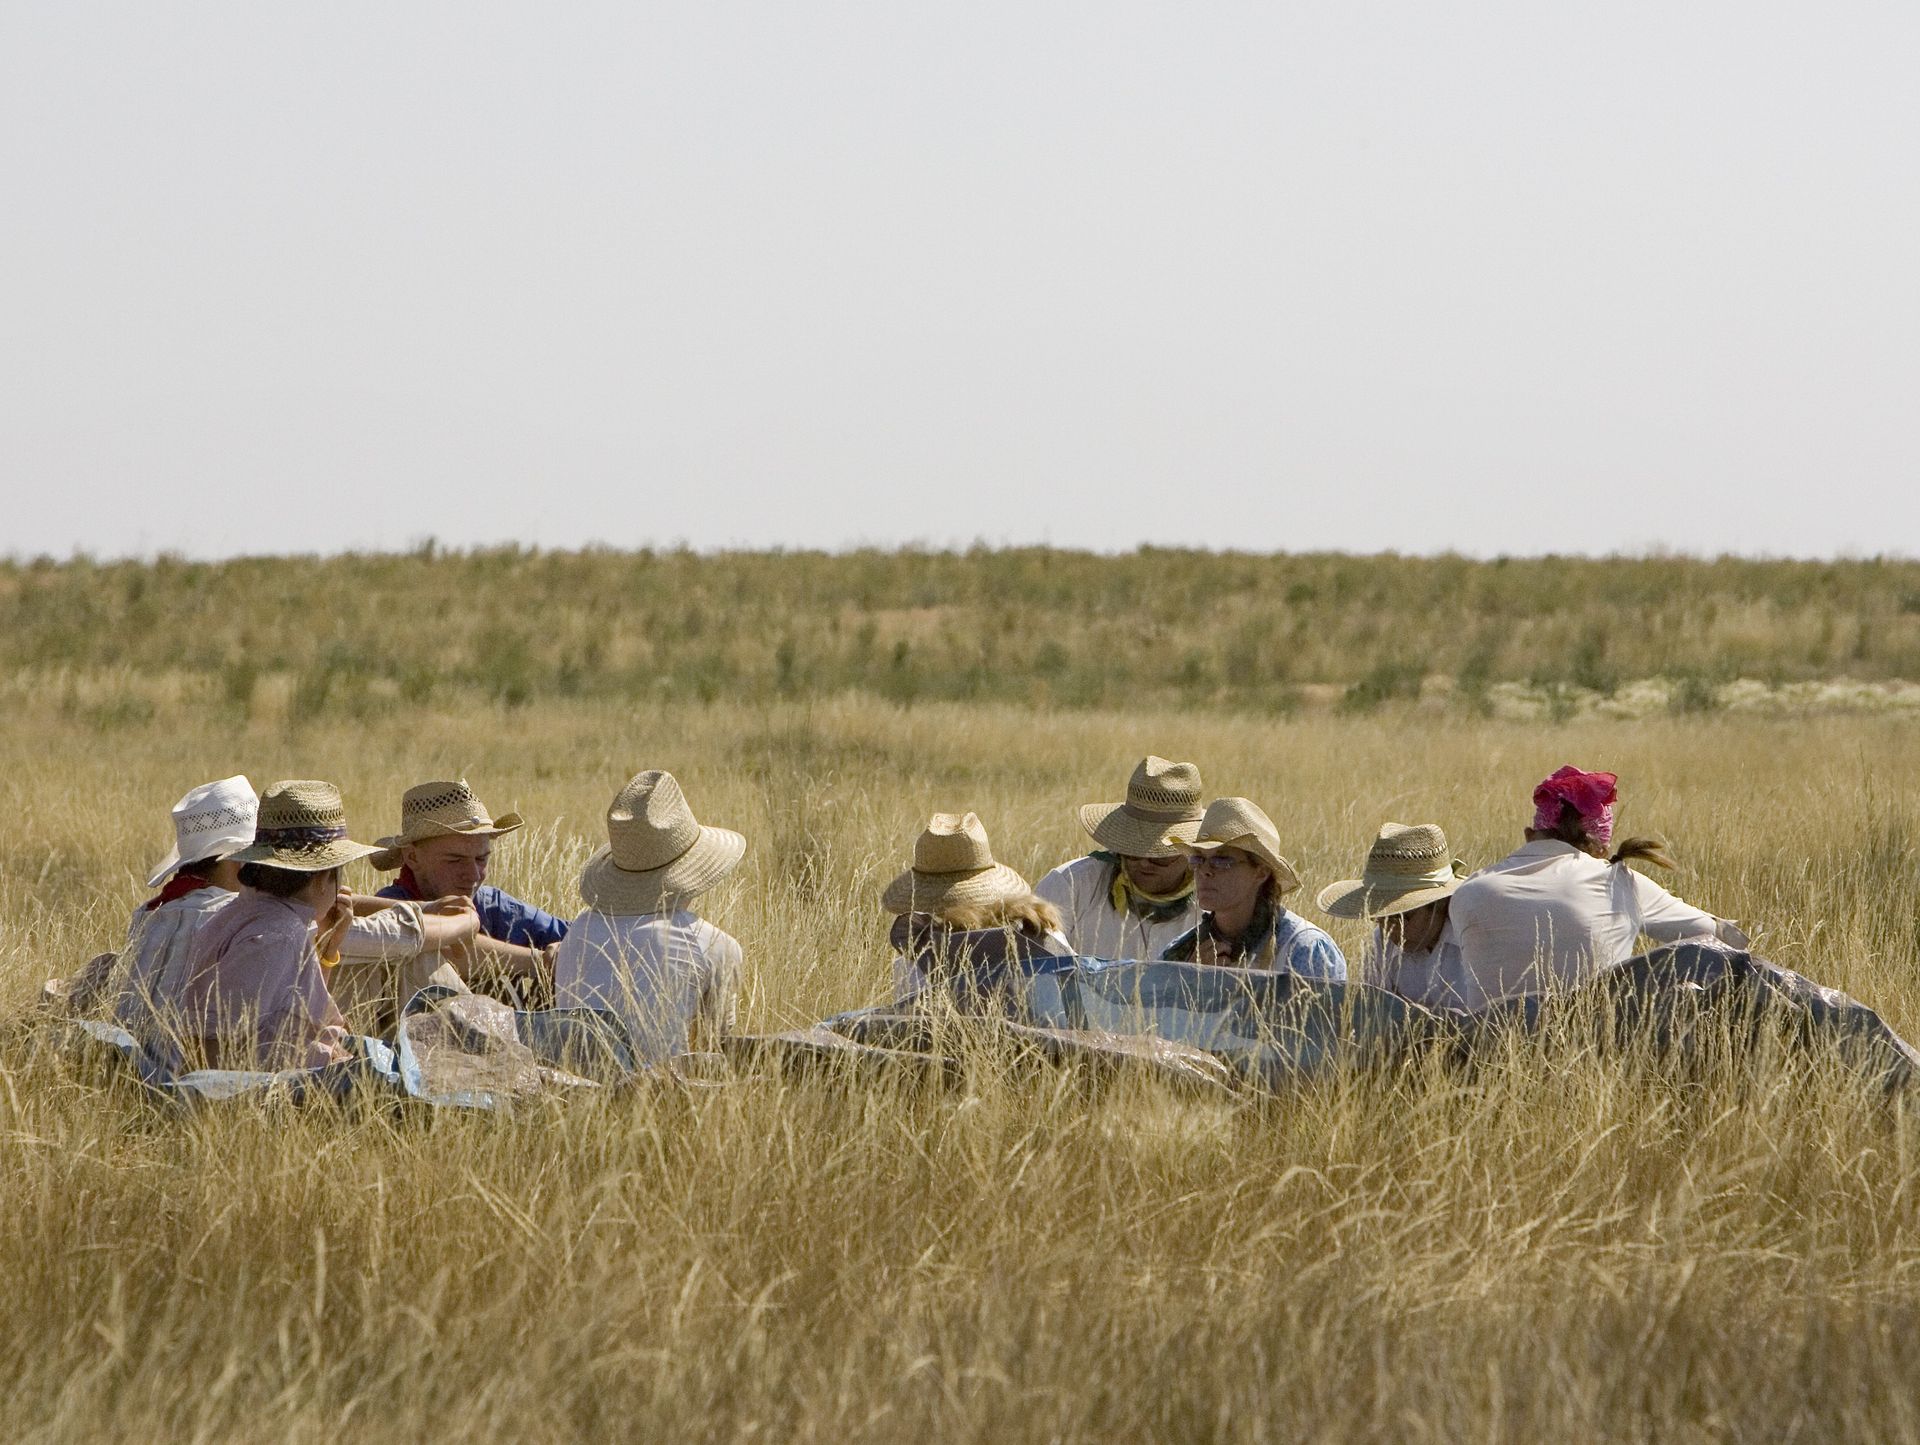 A group of people dressed in straw hats and pioneer clothing rest in a field of grass during trek.